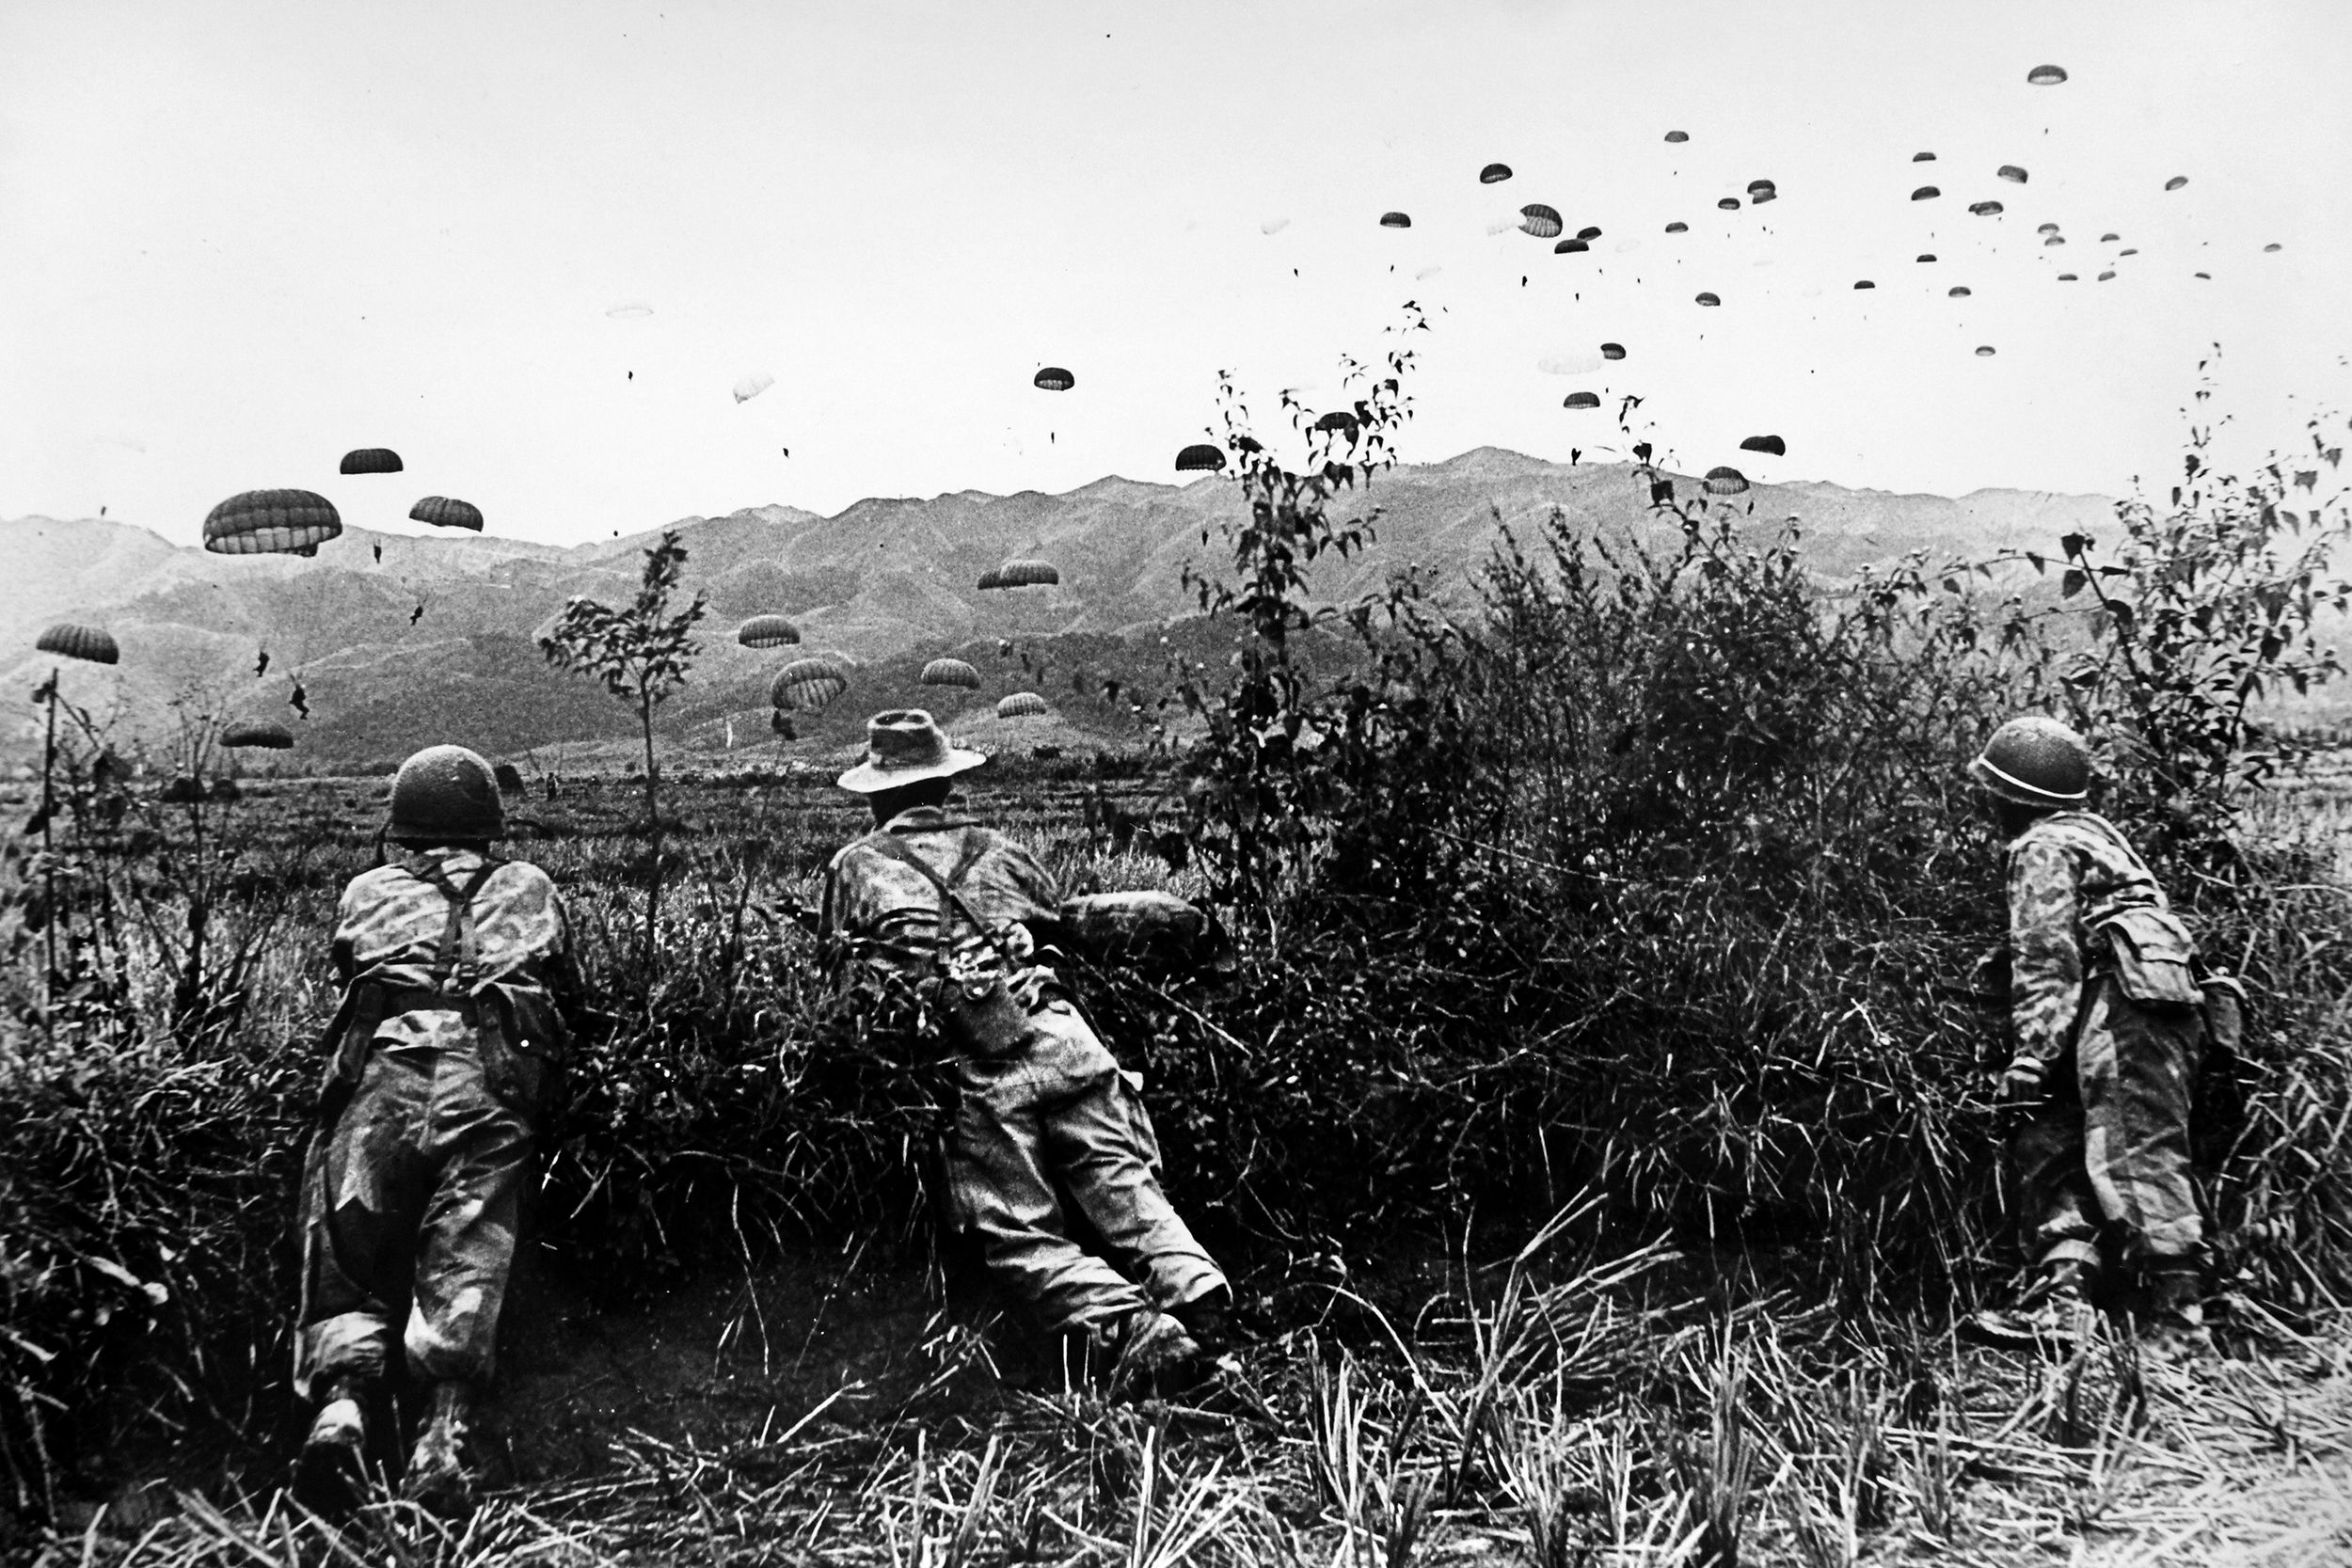 French paratroopers landing to participate in the Battle of Dien Bien Phu, (March 13 to May 7, 1954). In mid-October 1953, Col. Marcel Bigeard and the 6th Colonial Parachute Battalion dropped into the village of Tu Le to help the garrison at Gia Hoi evacuate back to the De Lattre Line. Fighting a rearguard action all the way, the battalion had a 60-percent casualty rate. 
